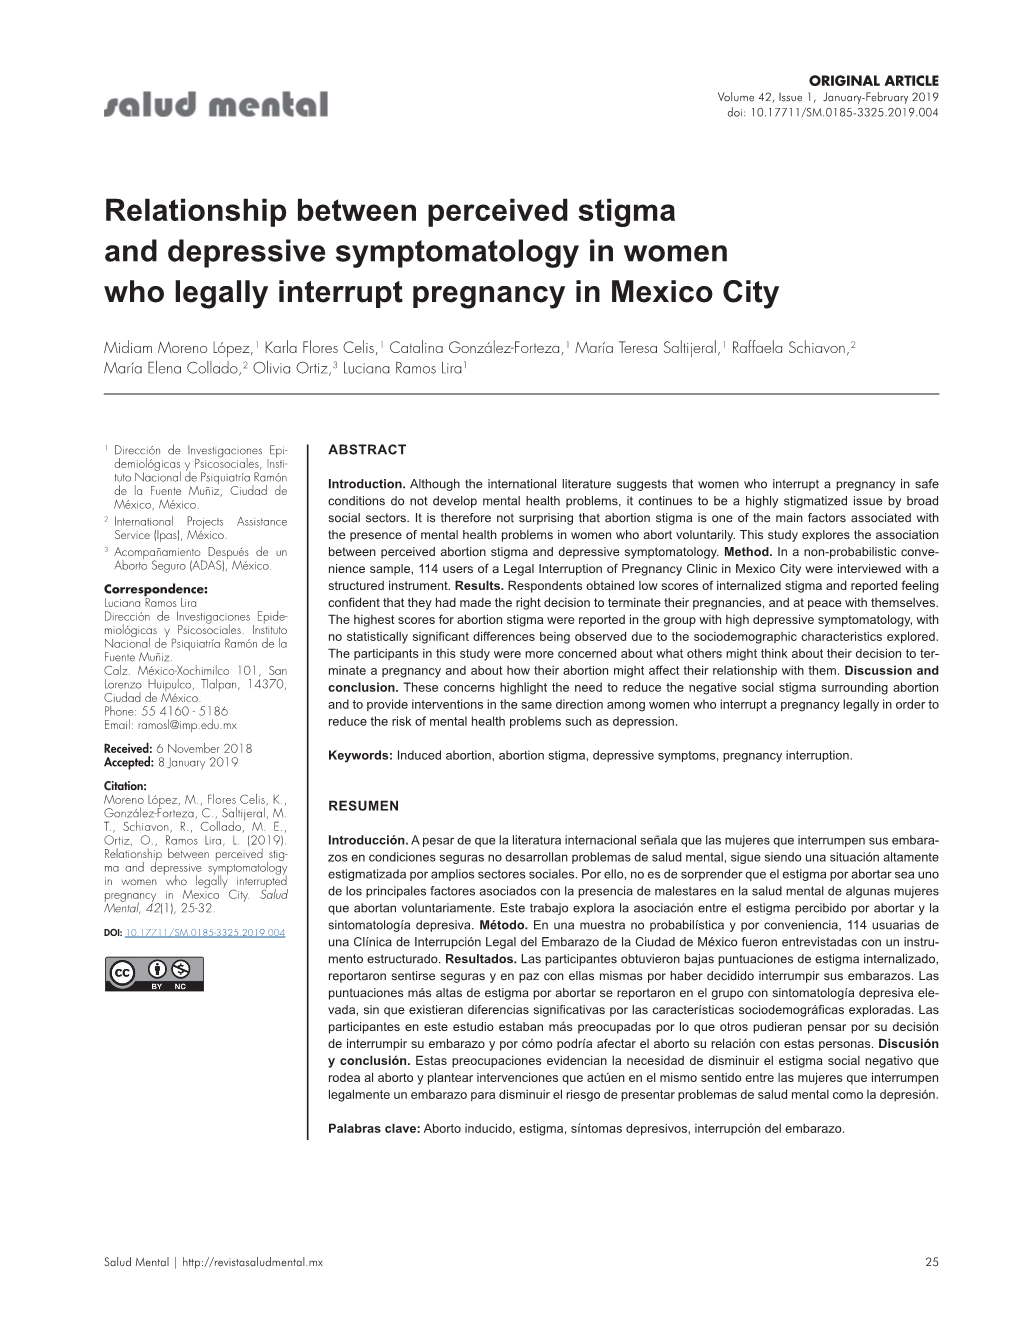 Relationship Between Perceived Stigma and Depressive Symptomatology in Women Who Legally Interrupt Pregnancy in Mexico City